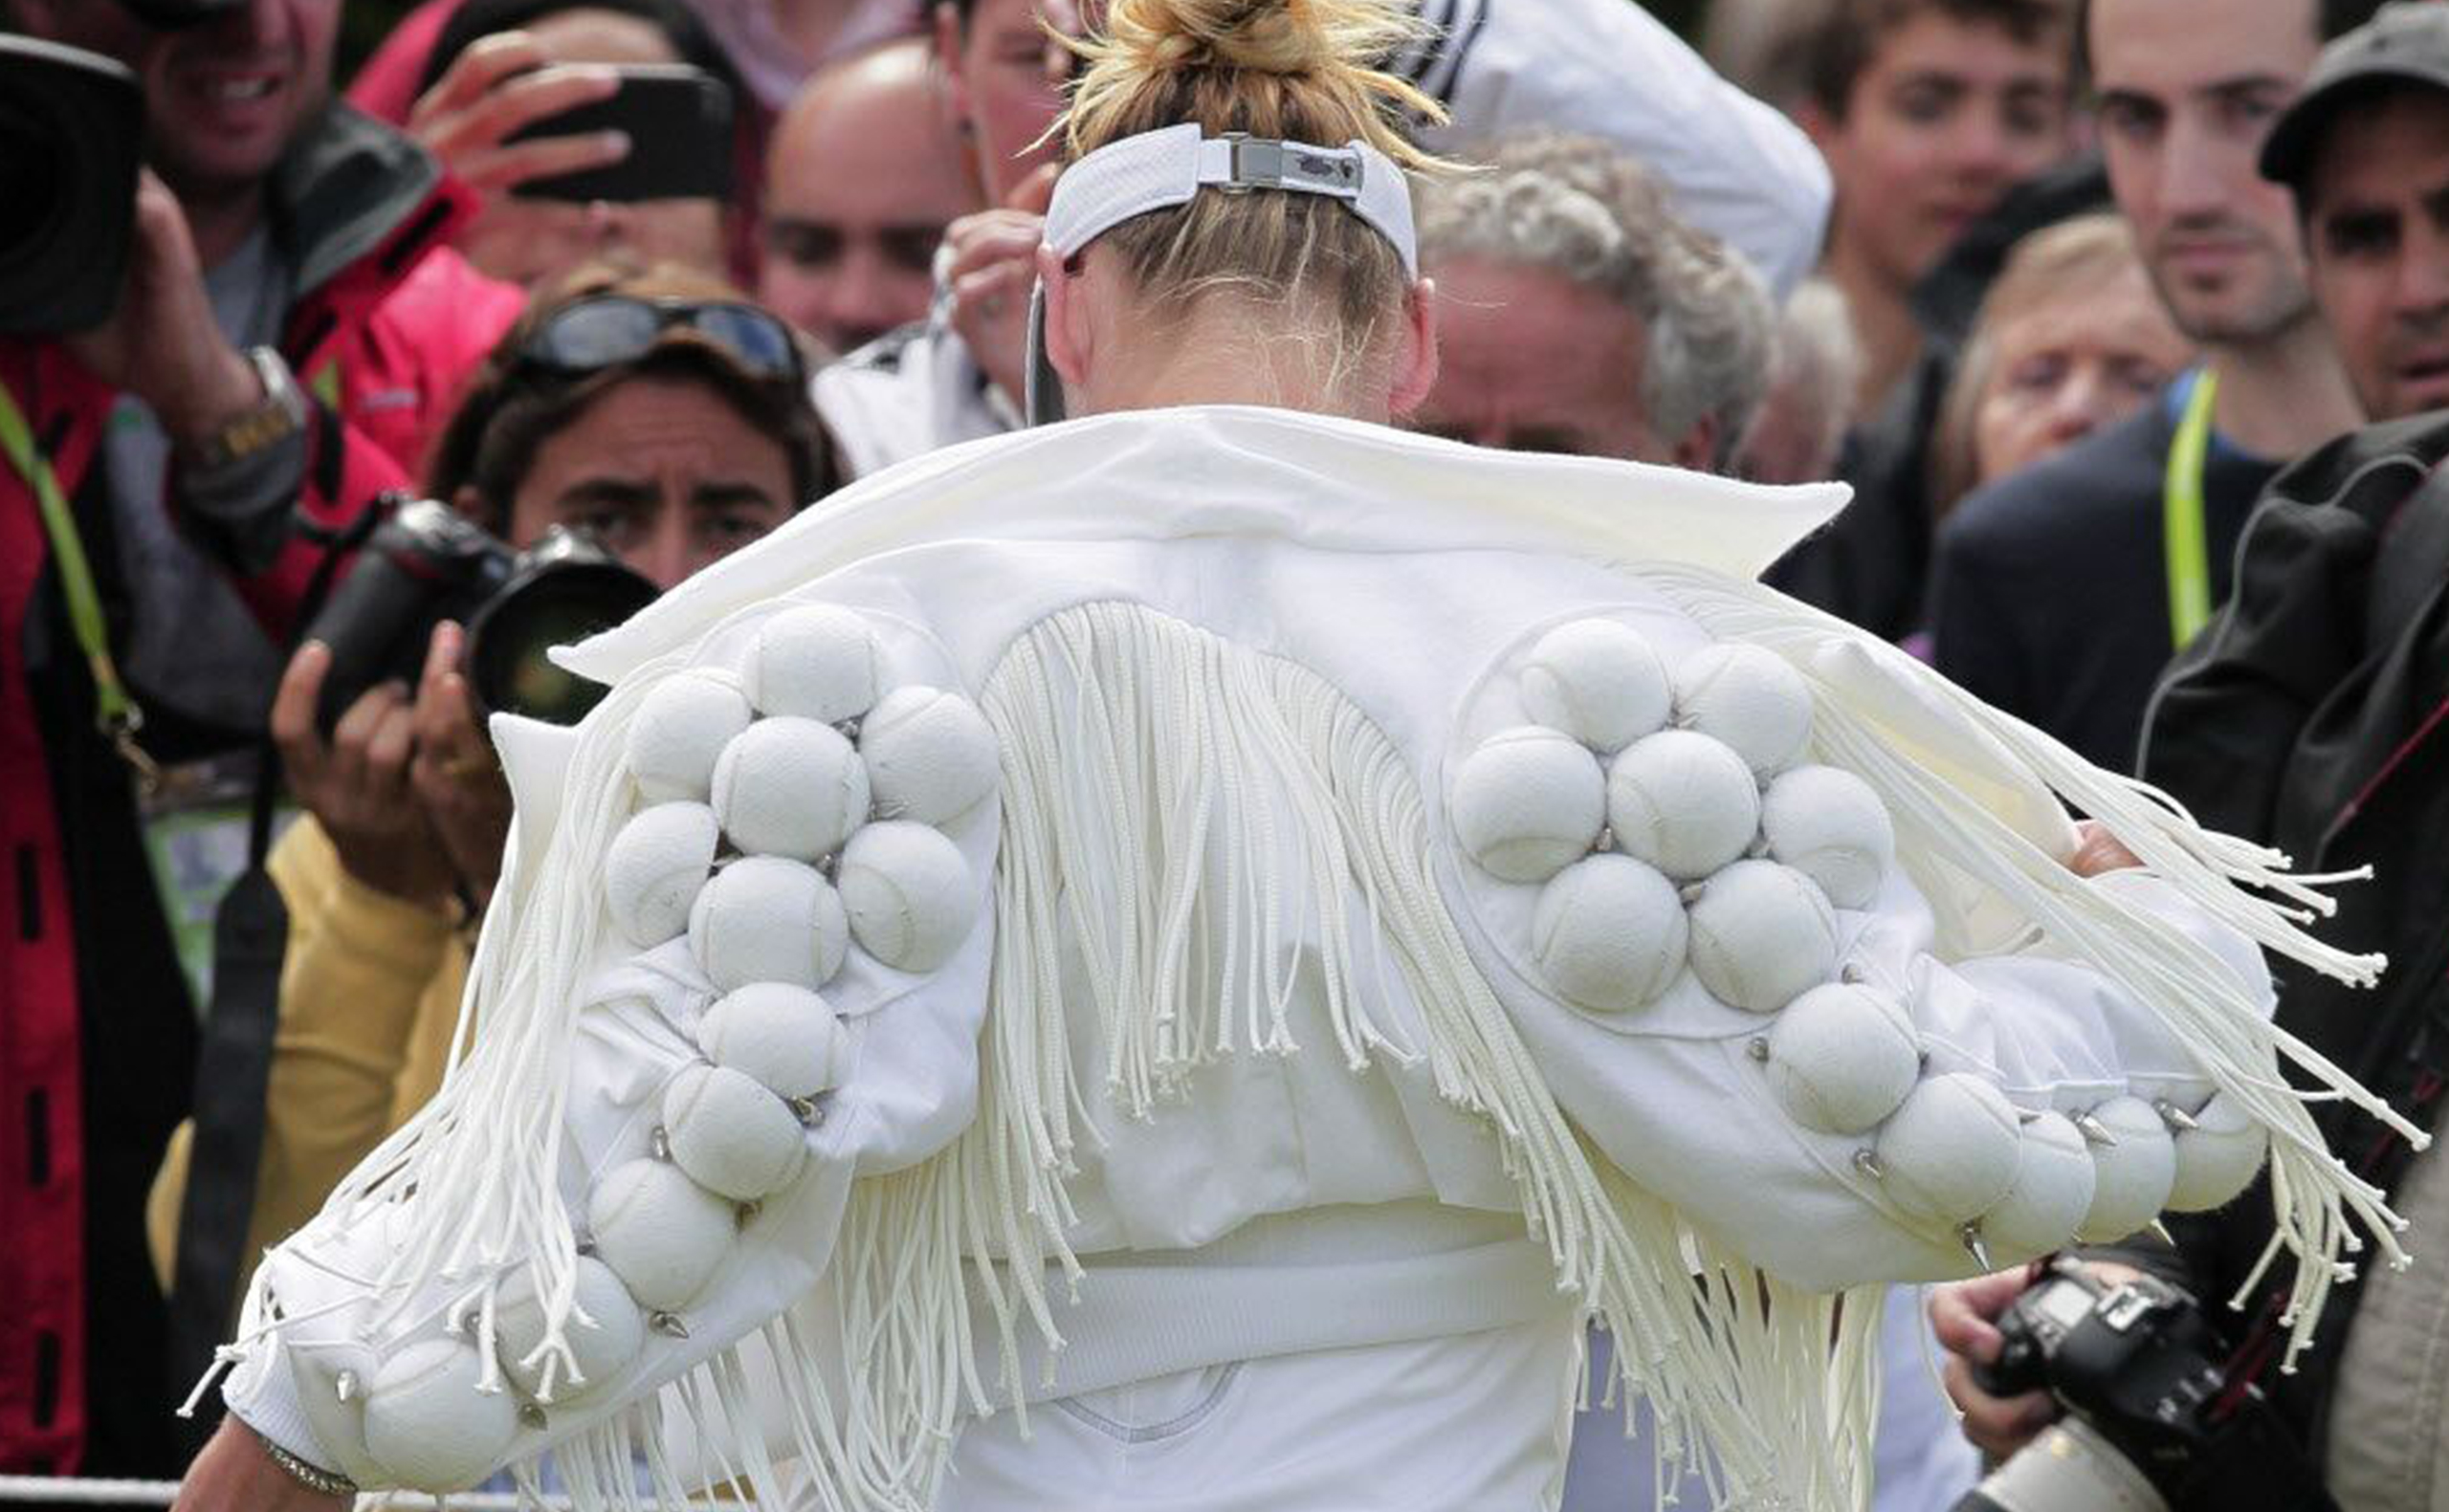 Bethanie Mattek-Sands wears a fringed jacket decorated with white tennis balls in 2011